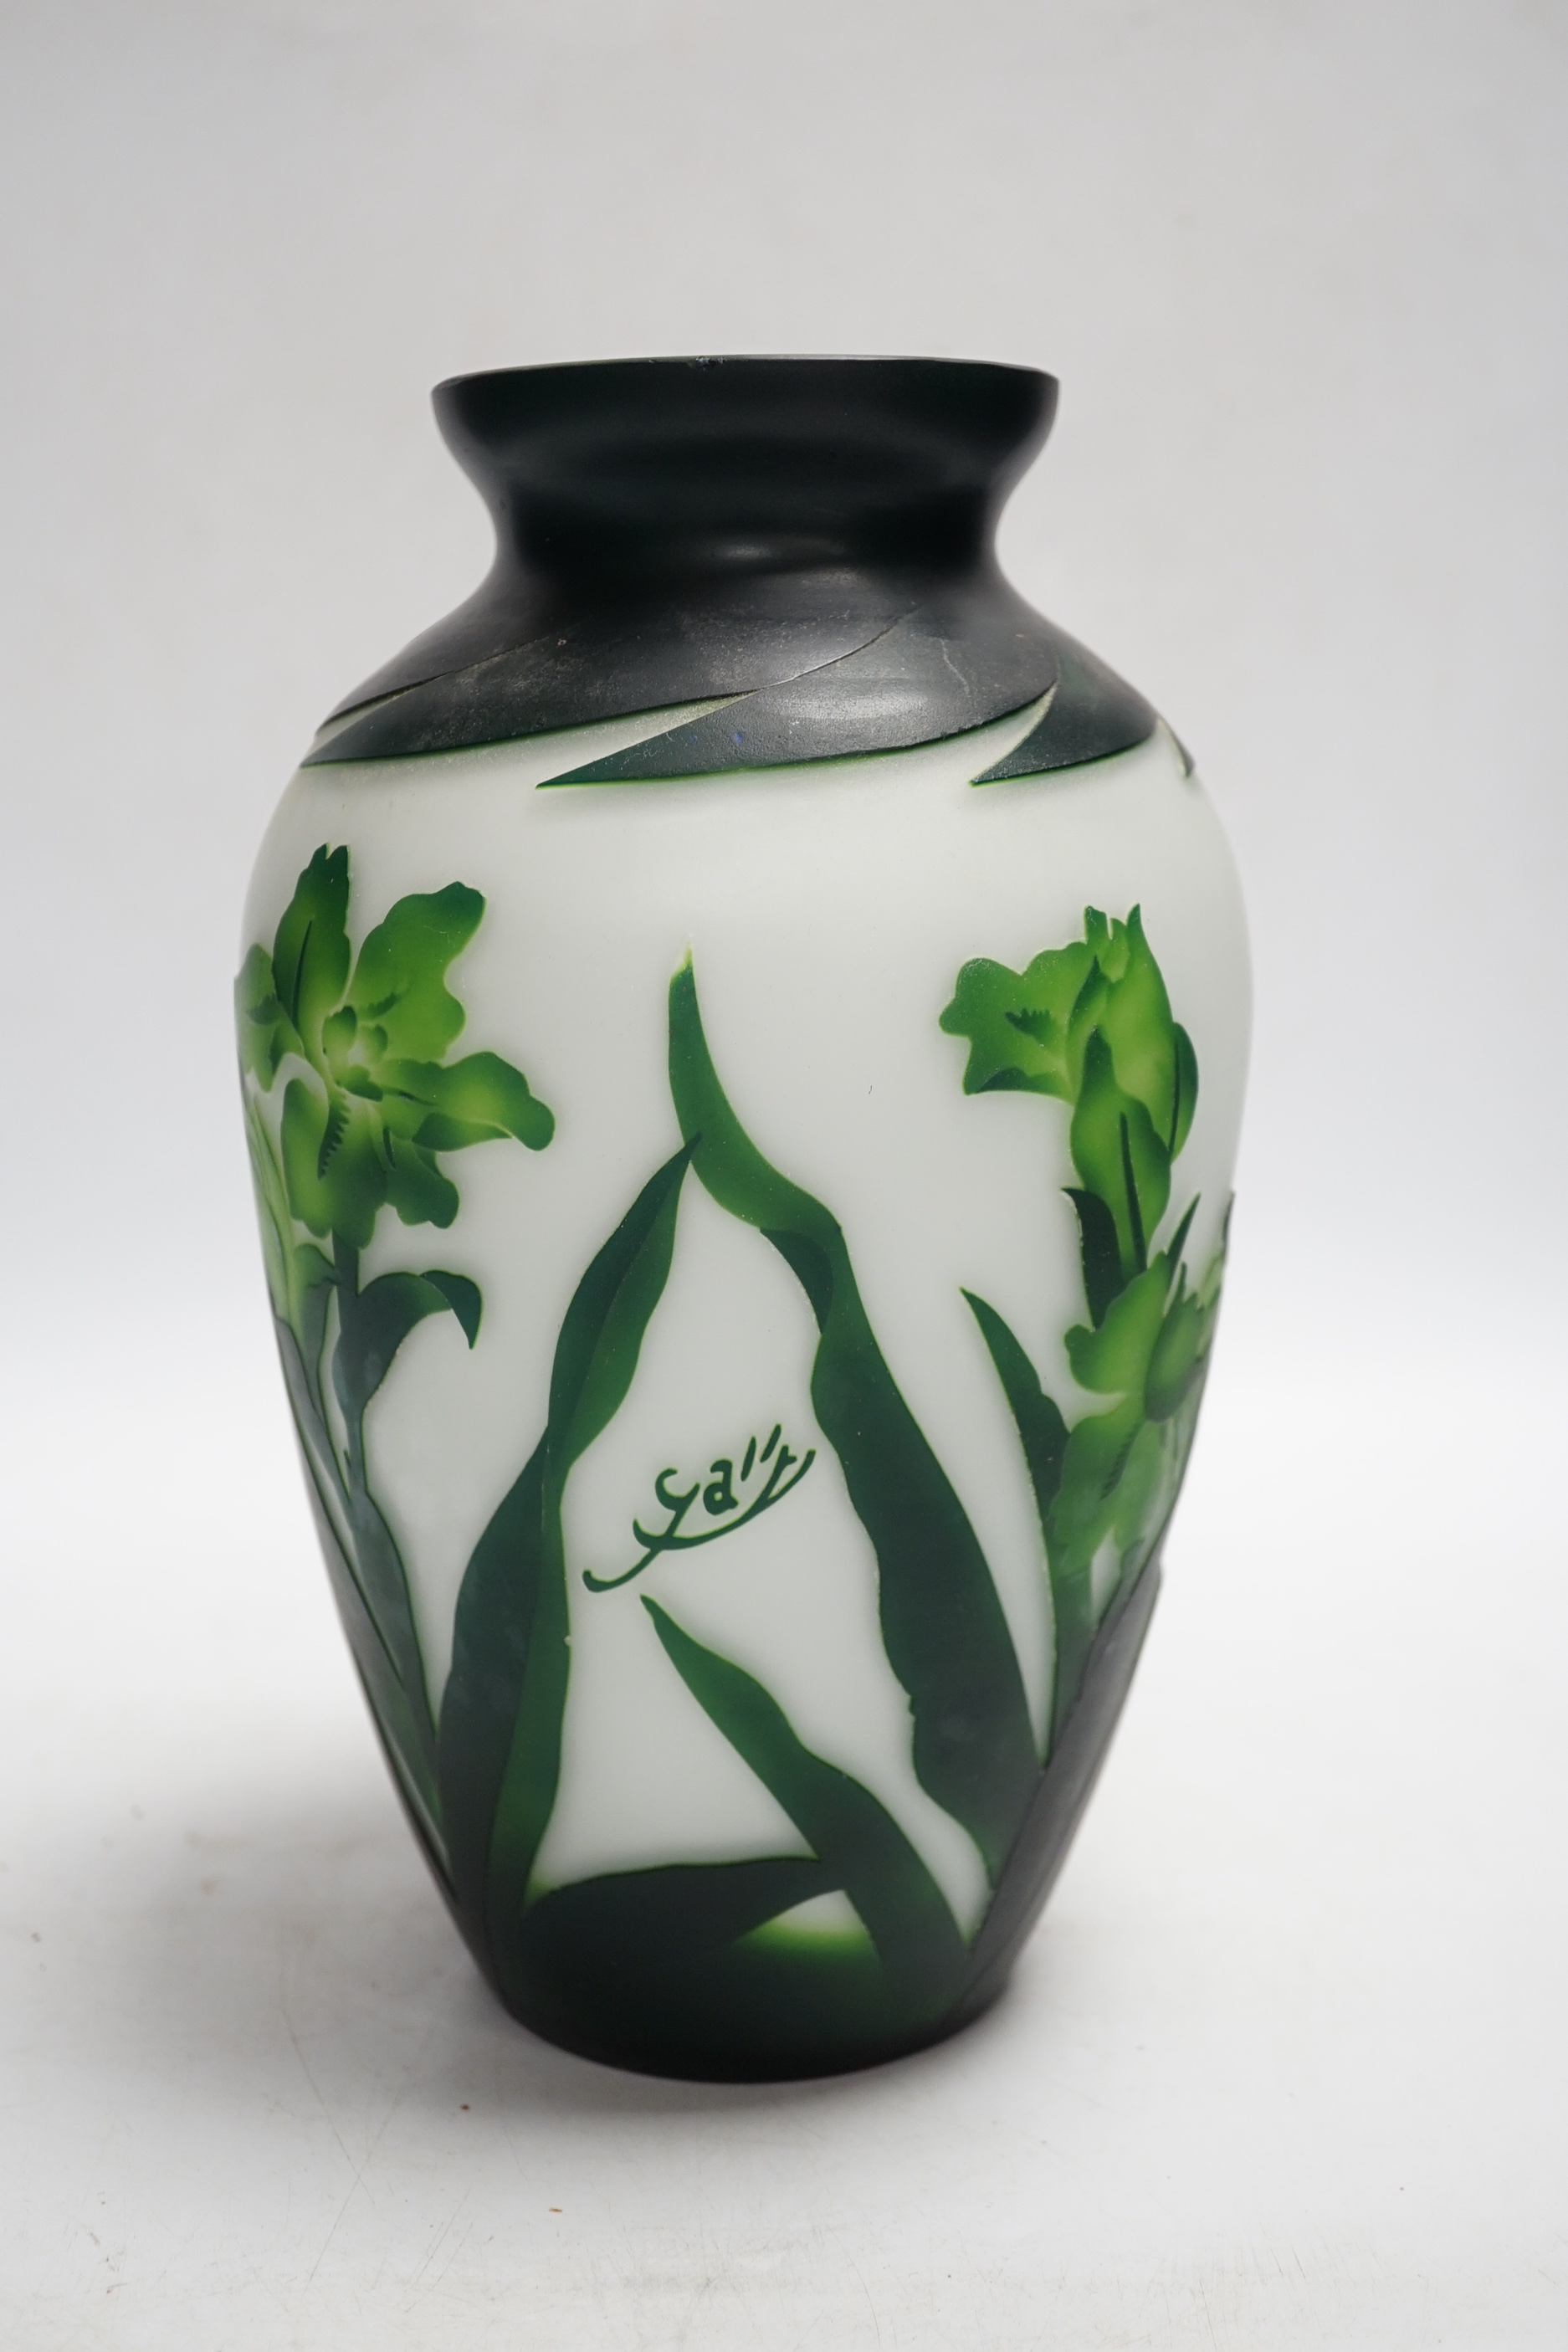 An Emile Galle style cameo glass vase, irises on white ground, 25cm high